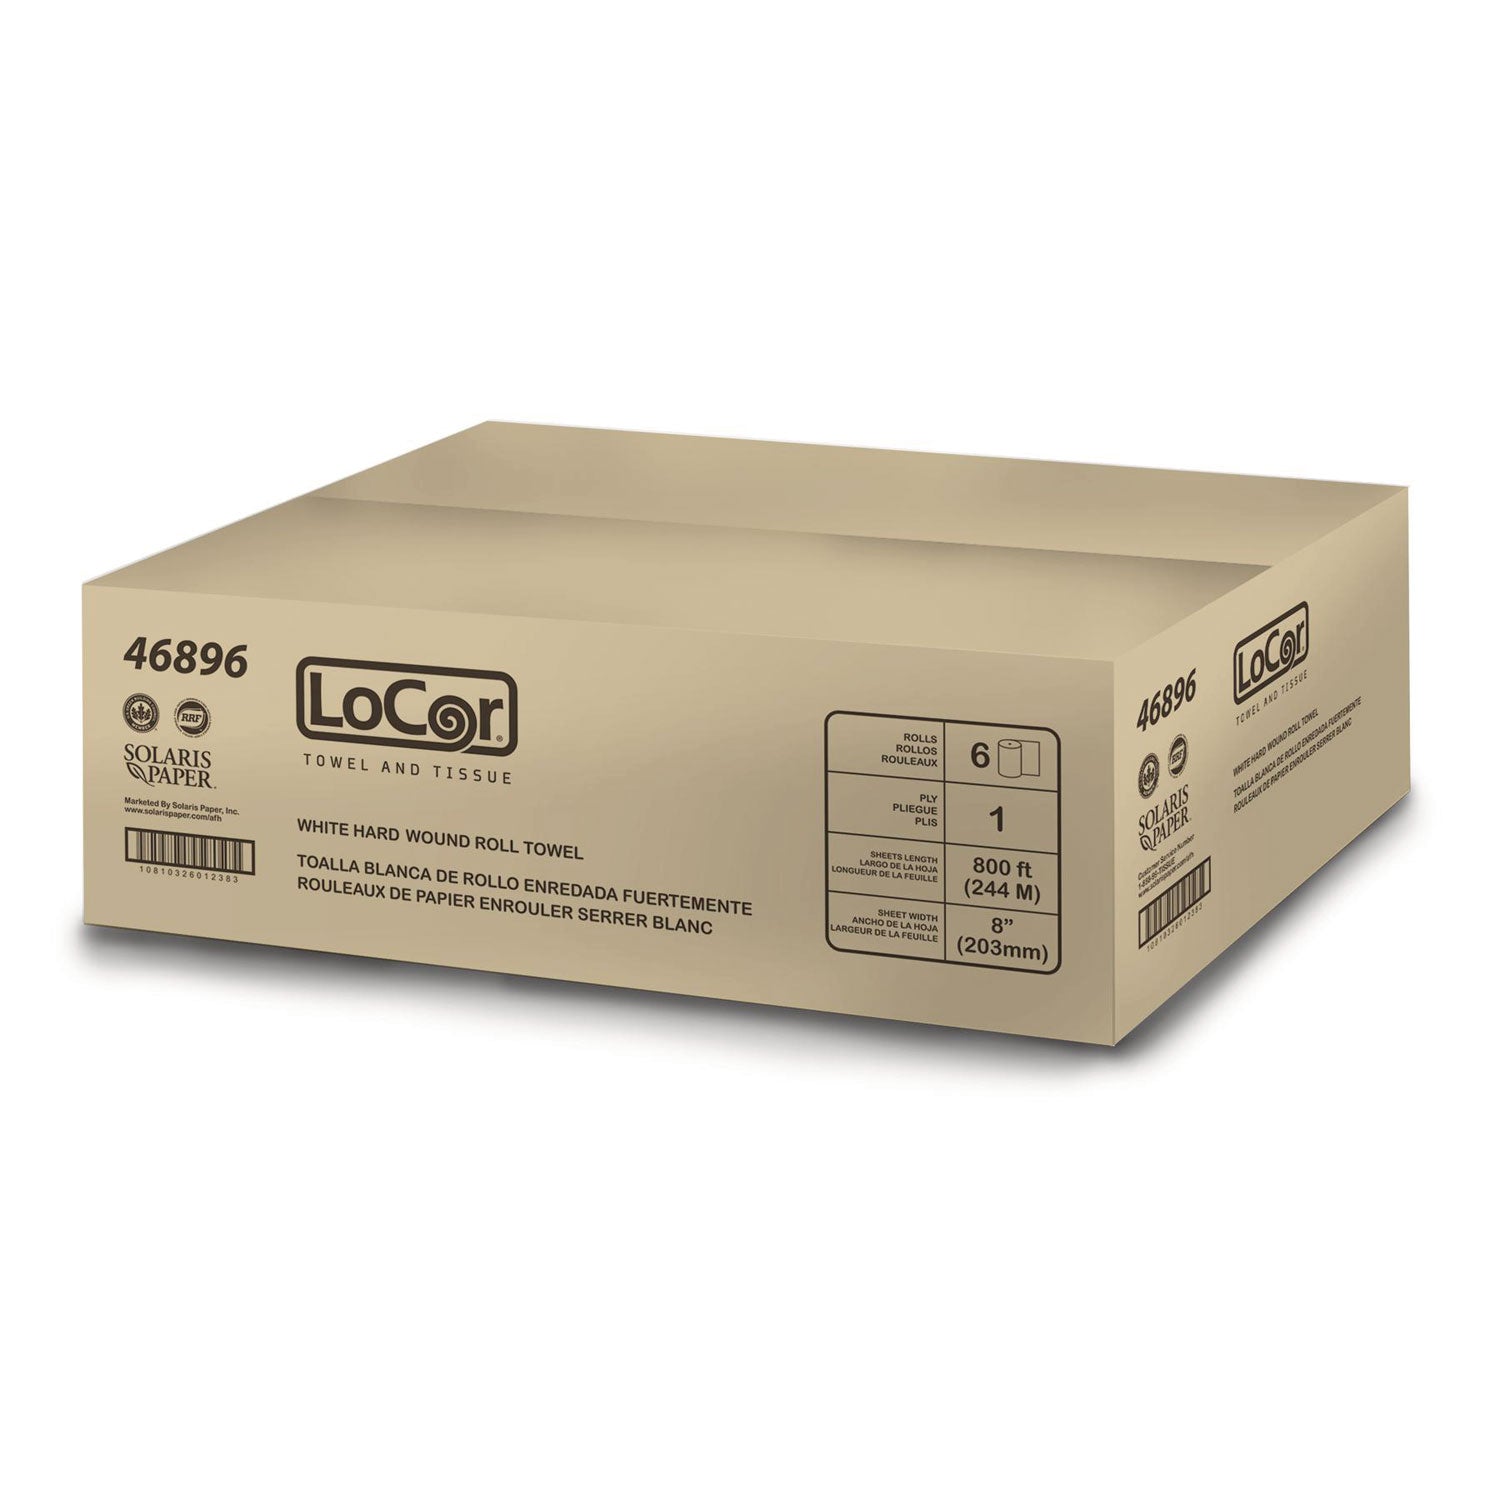 LoCor Hardwound Roll Towels - 1 Ply - 8" x 800 ft - White - Virgin Fiber - Hygienic, Embossed, Strong, Absorbent - For Washroom - 6 / Carton - 2